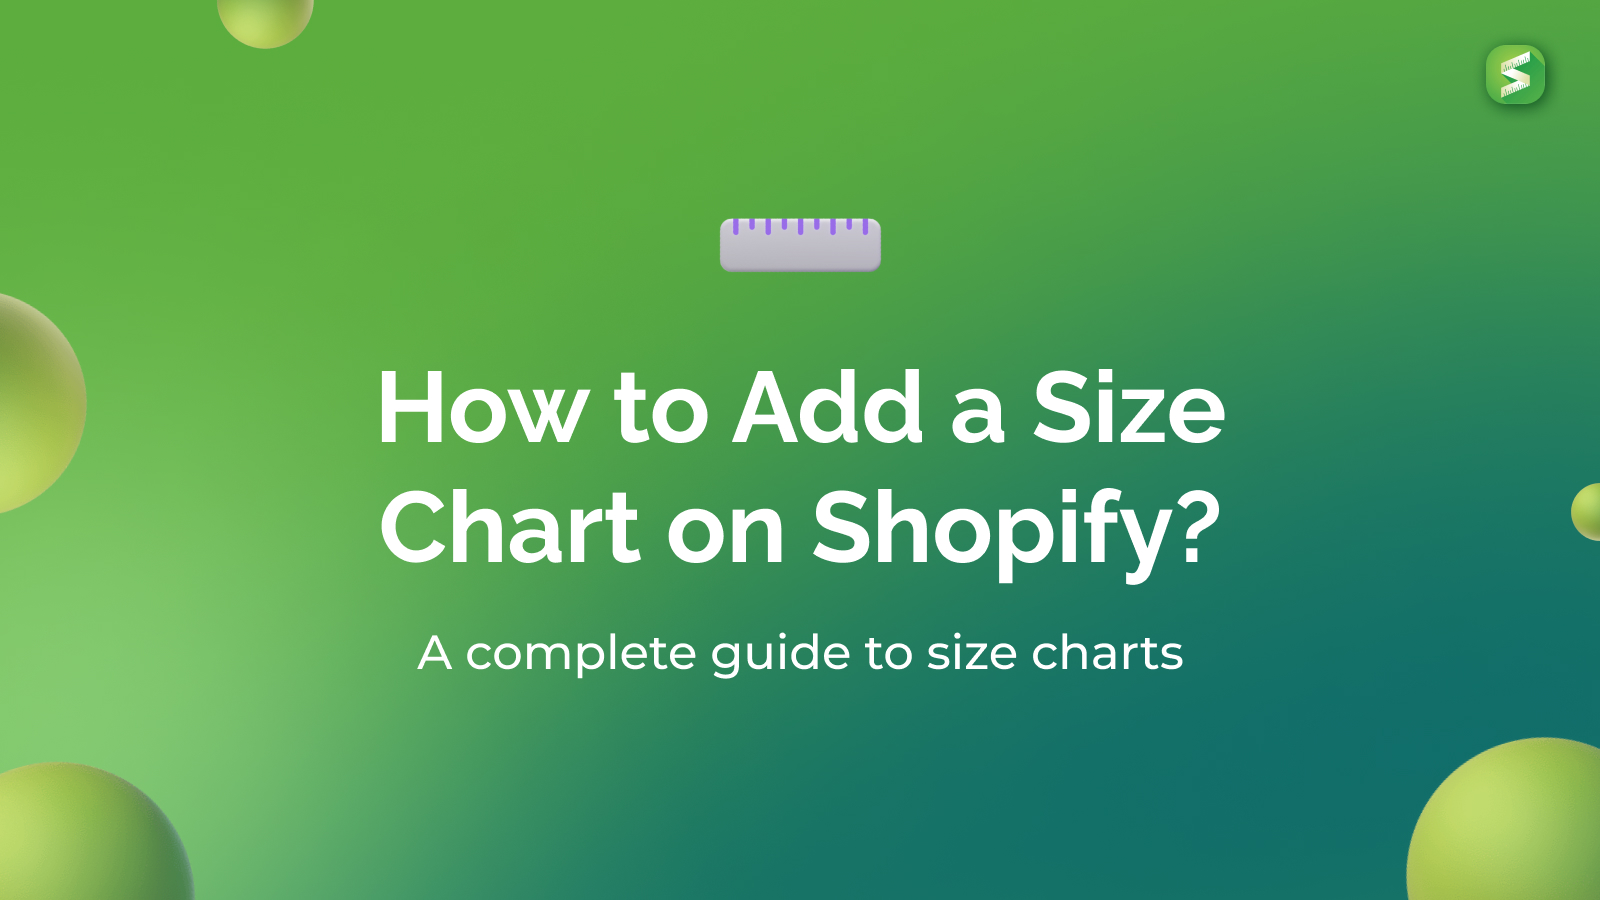 How to Add a Size Chart on Shopify